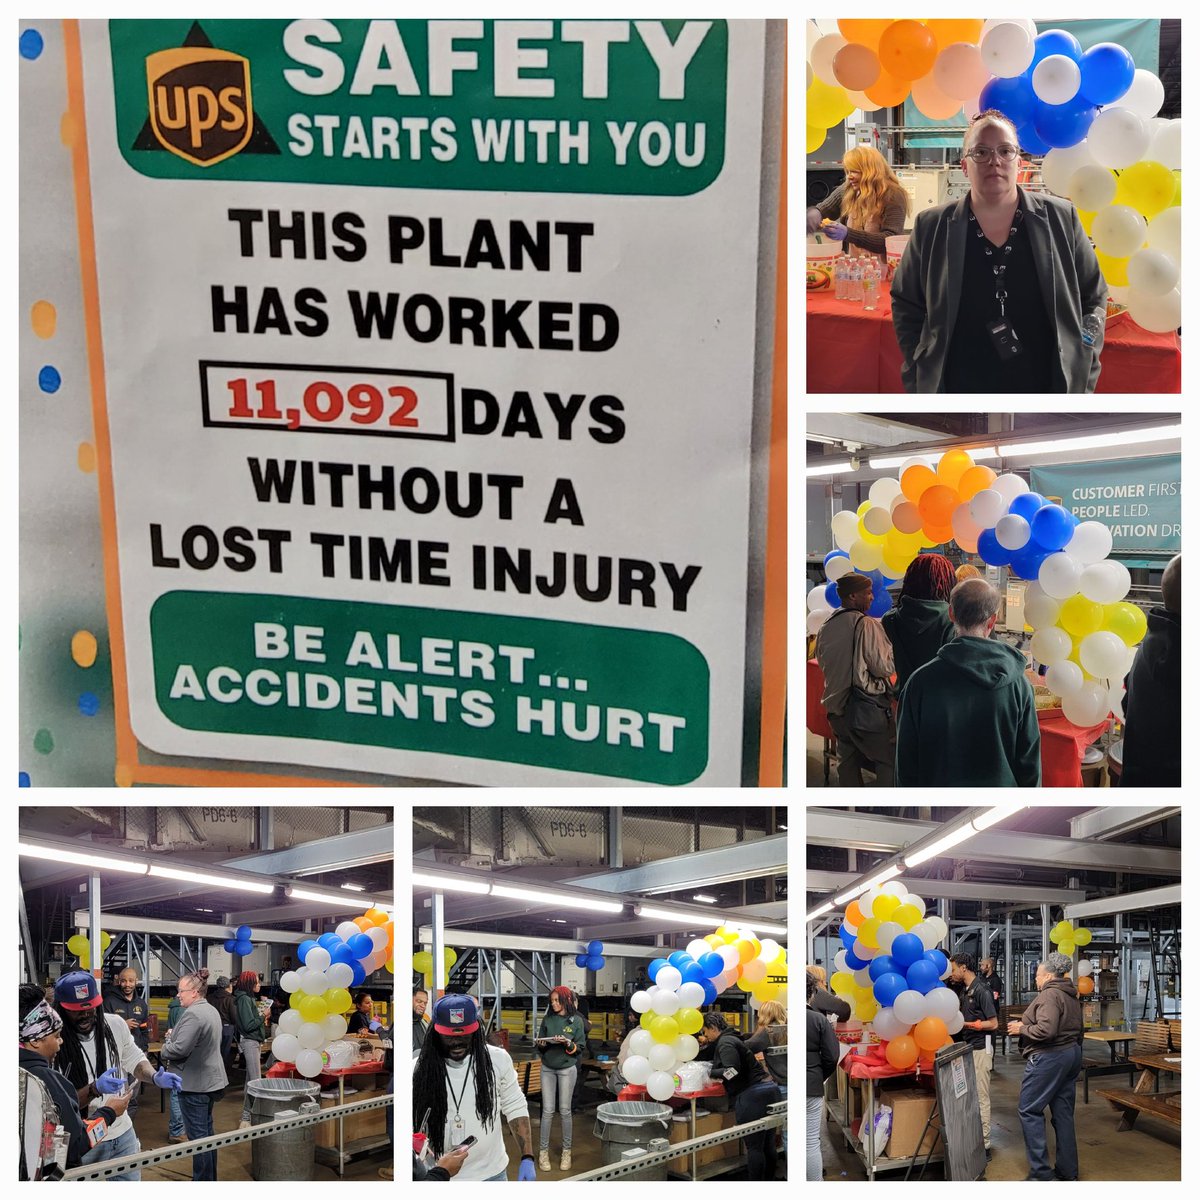 #TeamPHLSnaps @RayBarczak @daveortone @LaurenCarroll44 @RaymondChew95 @JamesSm03402046 Congratulations to the PHL Twilight on their accomplishments for over 11,000 safe work days. Recognition was given out for appreciation for working safe. Excellent job TEAM!